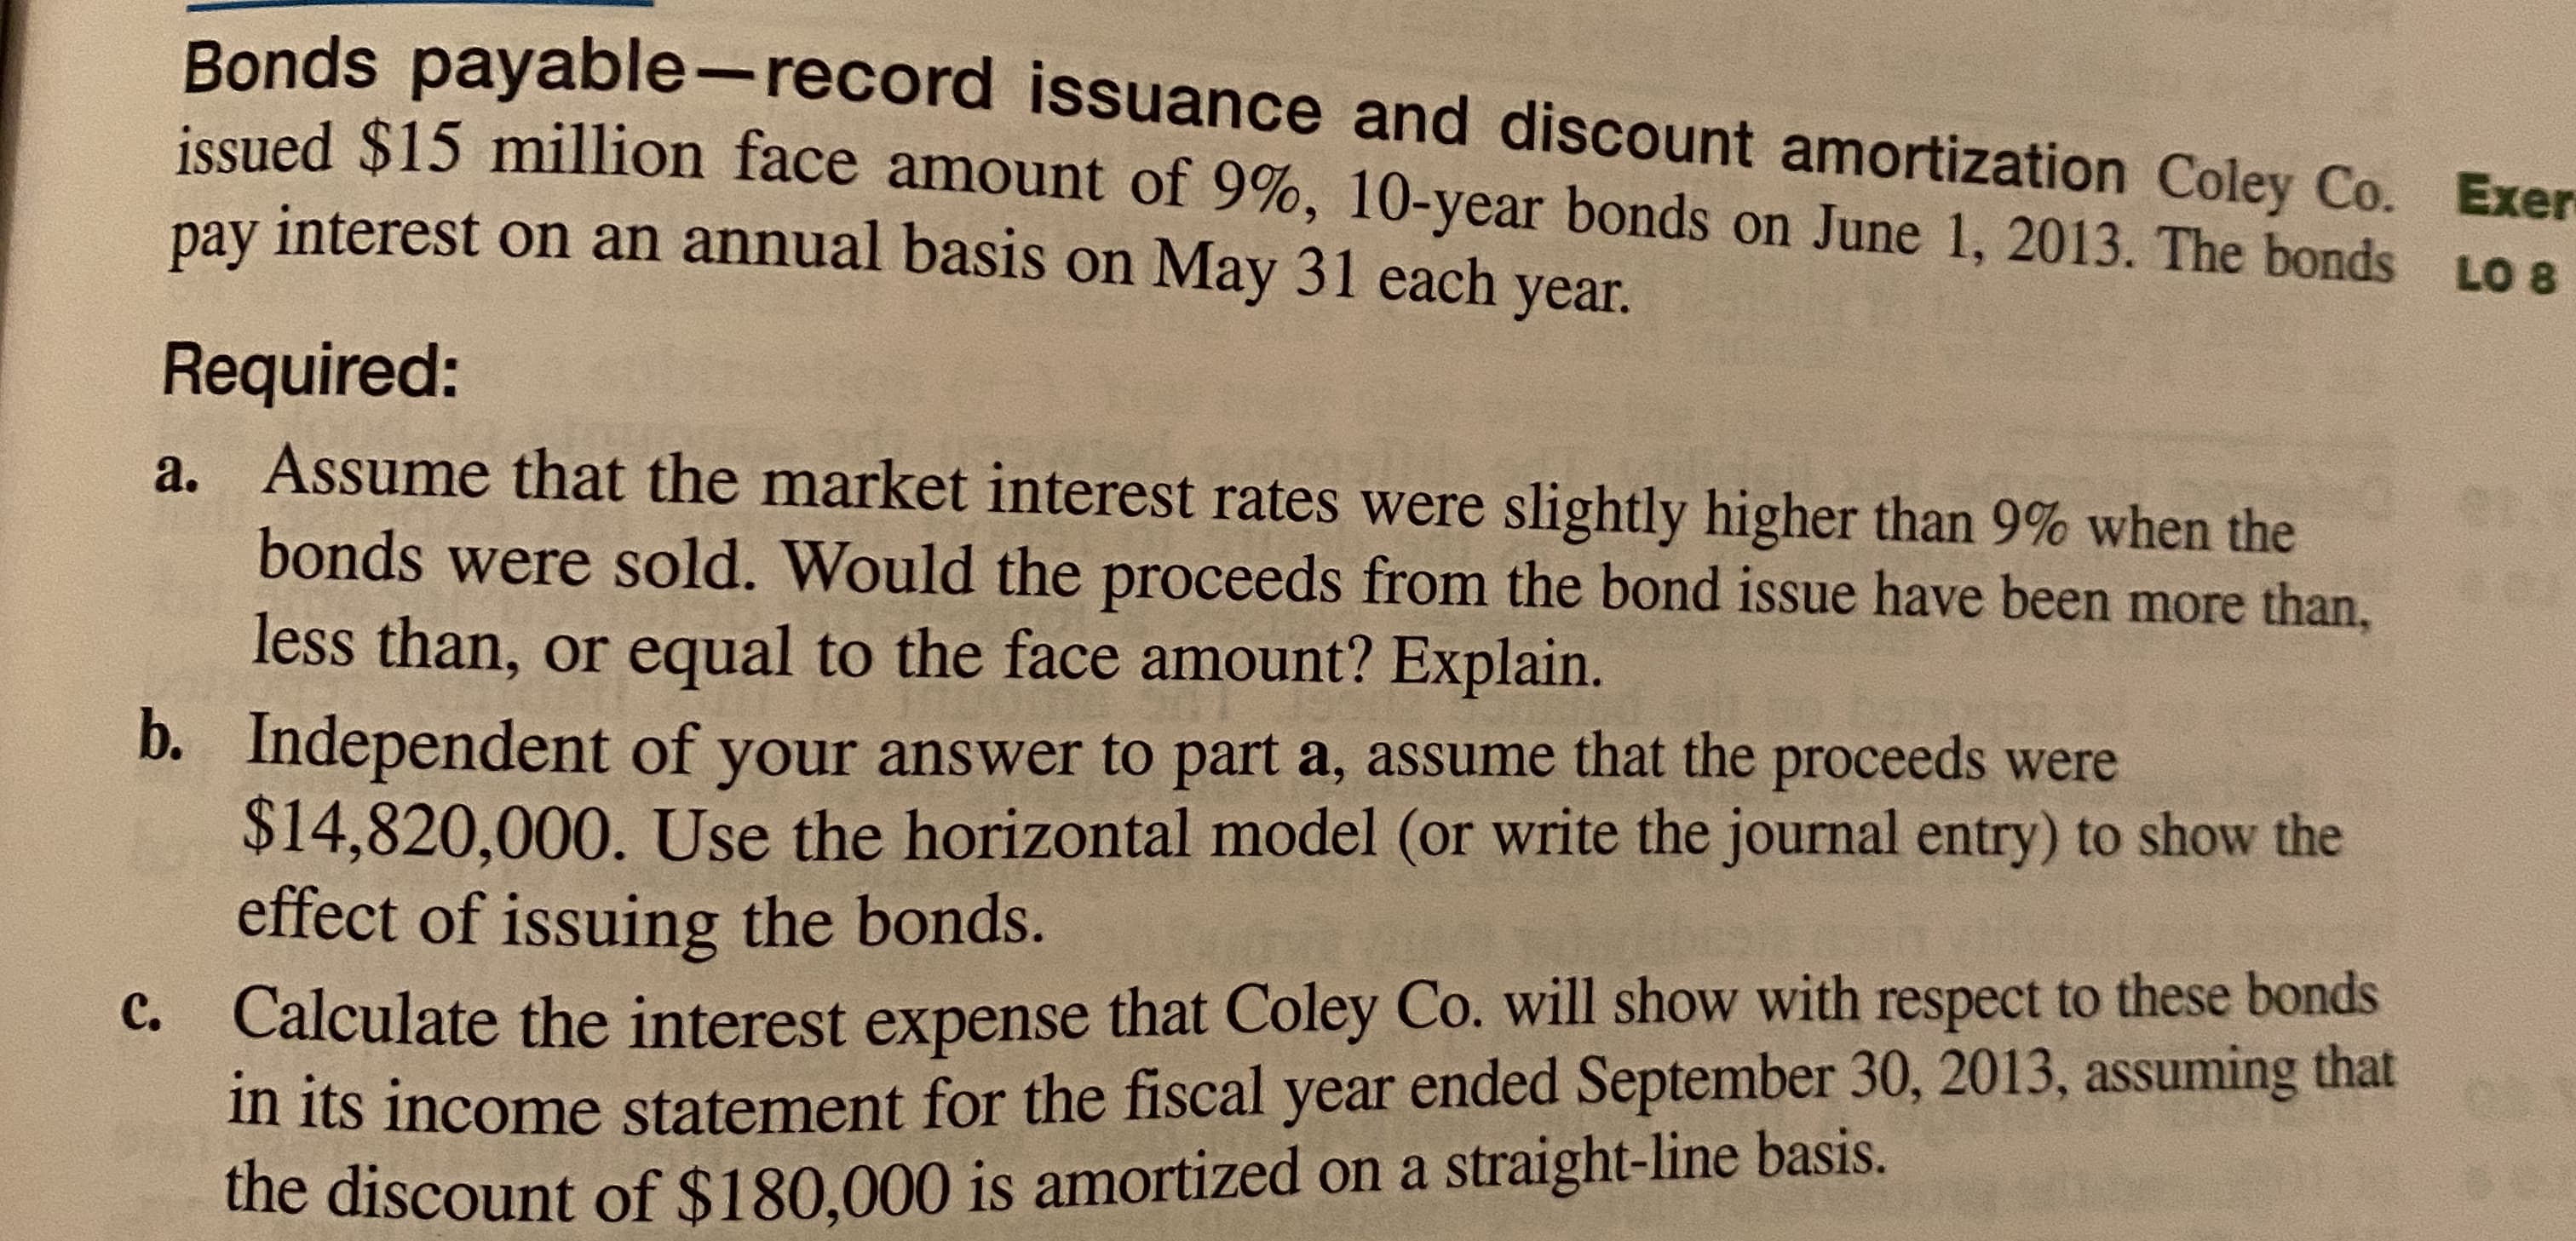 a. Assume that the market interest rates were slightly higher than 9% when the
bonds were sold. Would the proceeds from the bond issue have been more than,
less than, or equal to the face amount? Explain.
b. Independent of your answer to part a, assume that the proceeds were
$14,820,000. Use the horizontal model (or write the journal entry) to show the
effect of issuing the bonds.
C. Calculate the interest expense that Coley Co. will show with respect to these bonds
in its income statement for the fiscal year ended September 30, 2013, assuming that
the discount of $180.000 is amortized on a straight-line basis.
